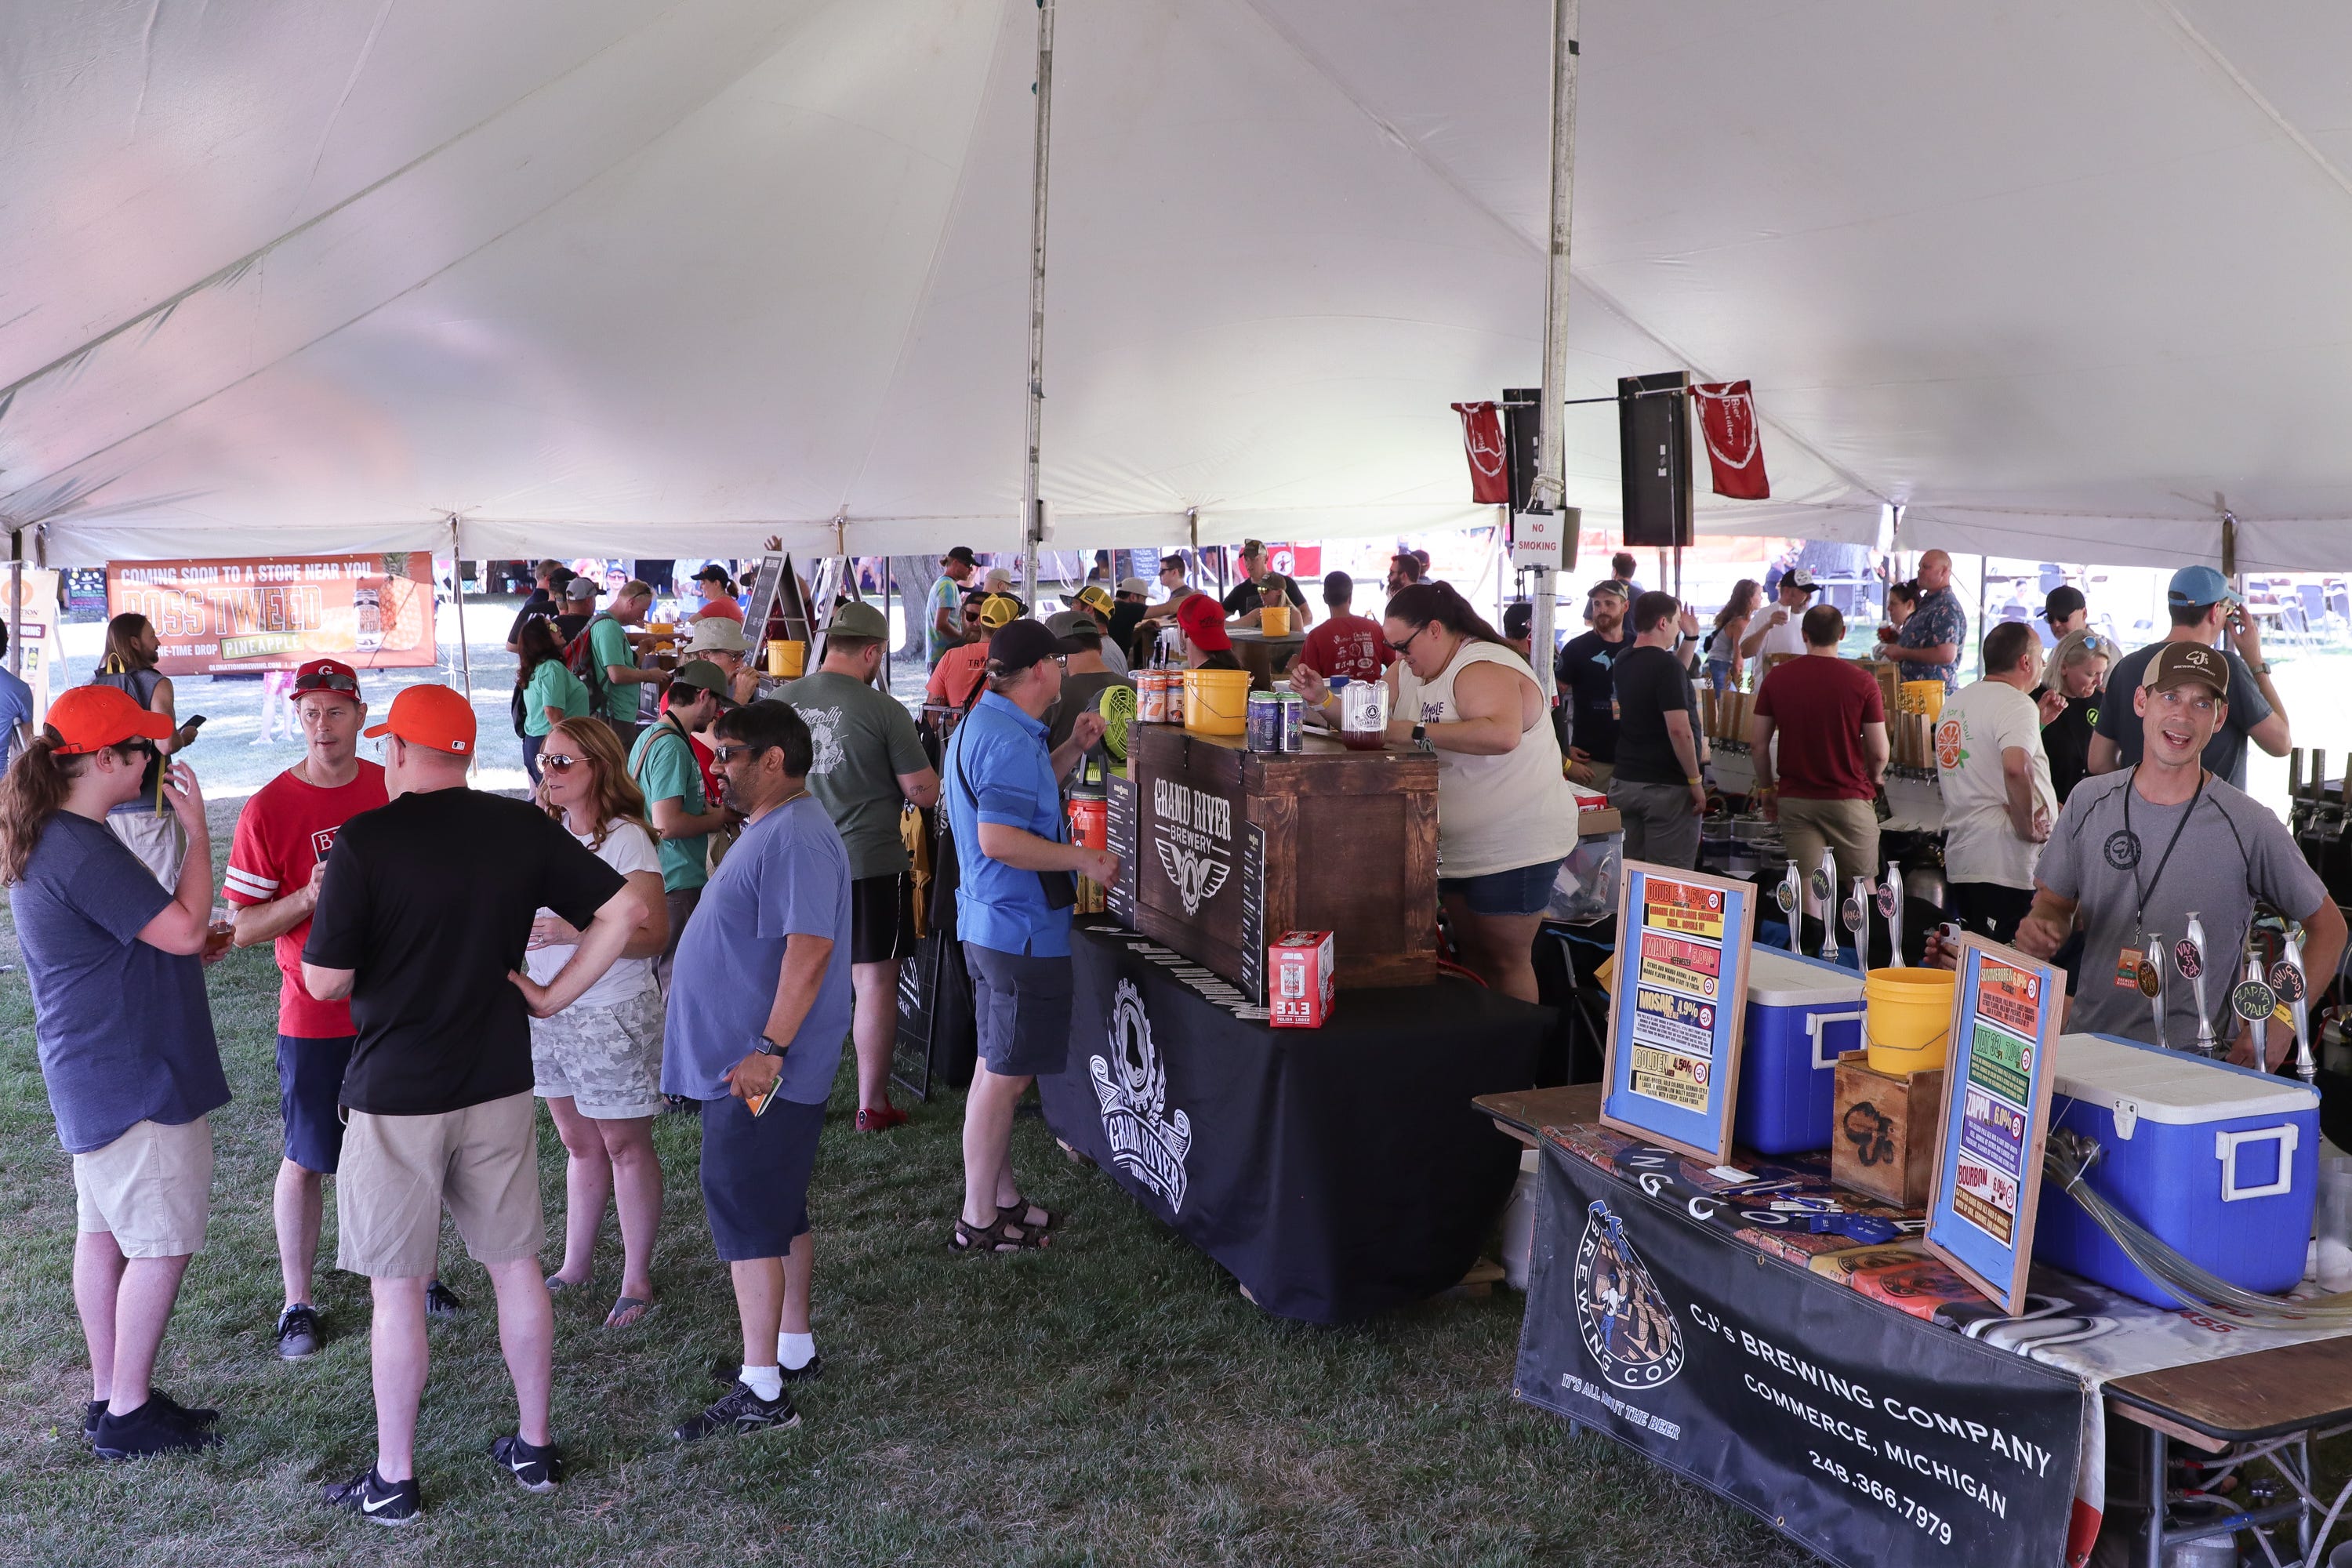 A look inside Tent 2 at the Michigan Brewers Guild's Summer Beer Festival in Ypsilanti's Riverside Park on Friday, July 22, 2022.